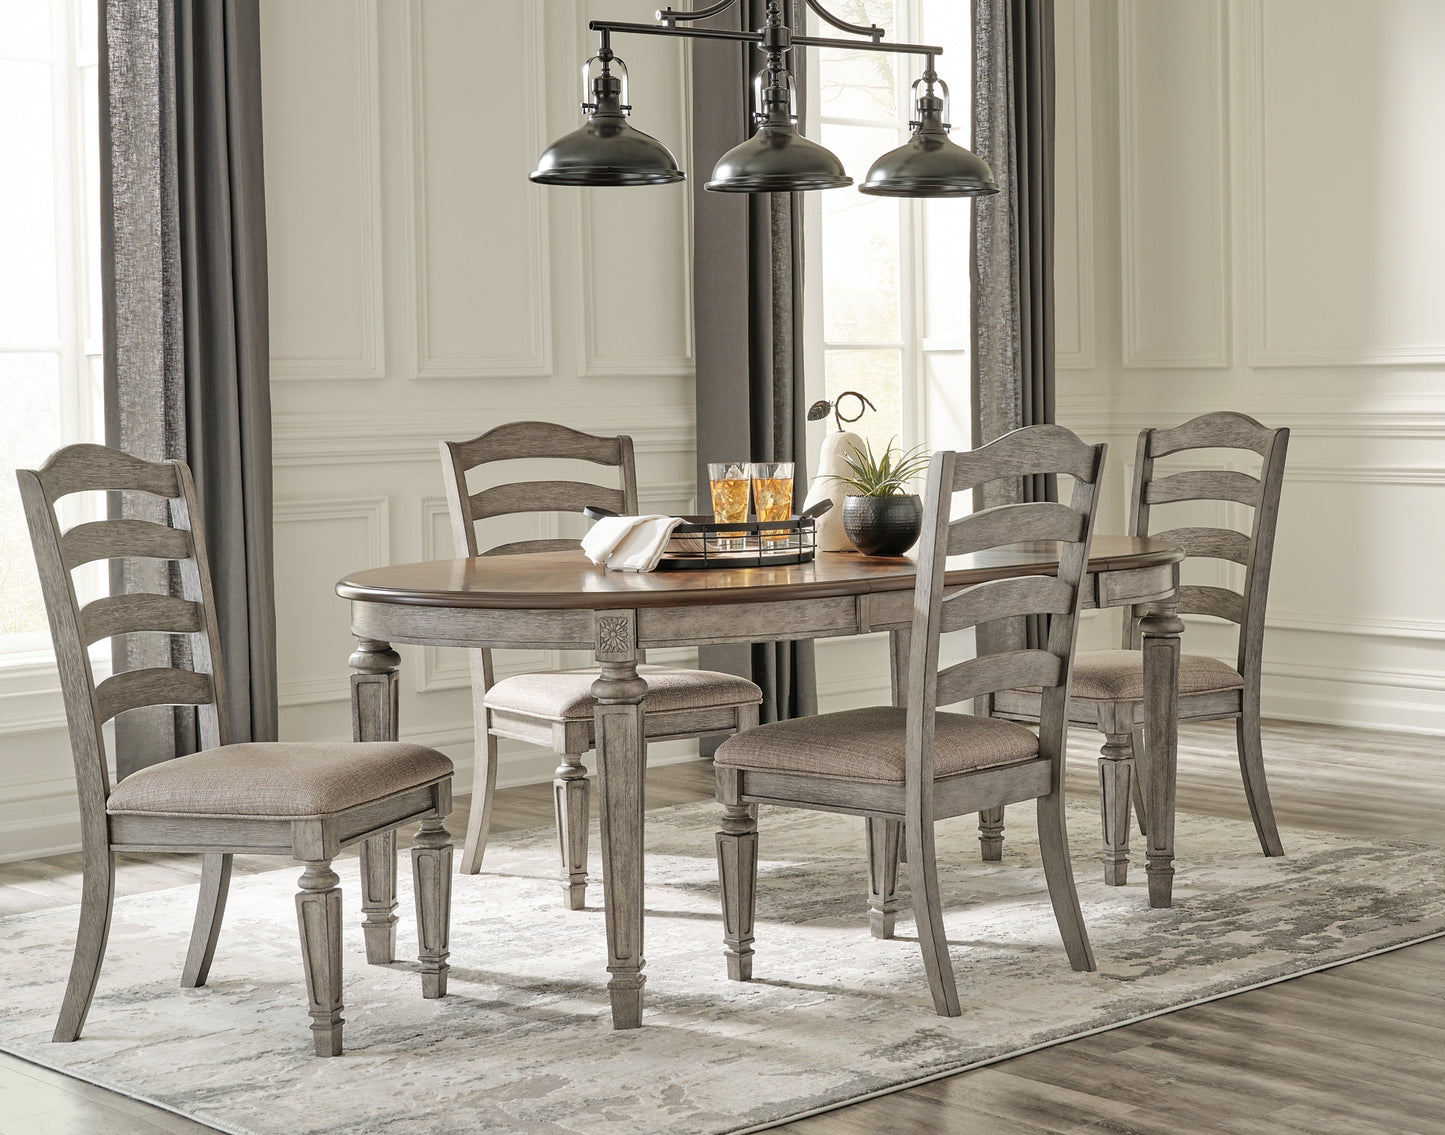 Lodenbay Dining Table and 4 Chairs